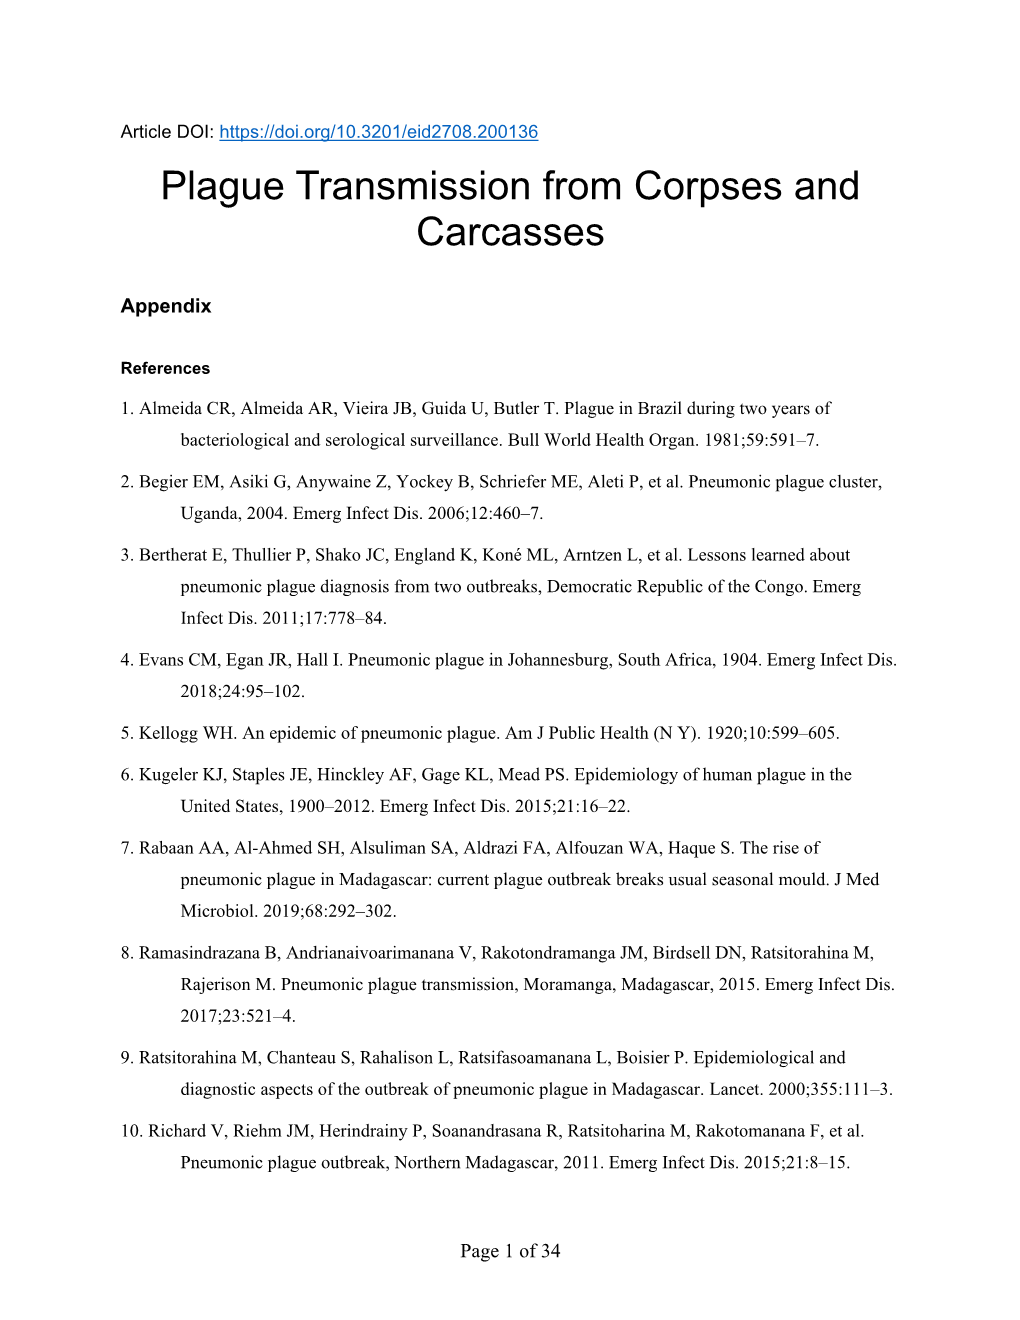 Plague Transmission from Corpses and Carcasses